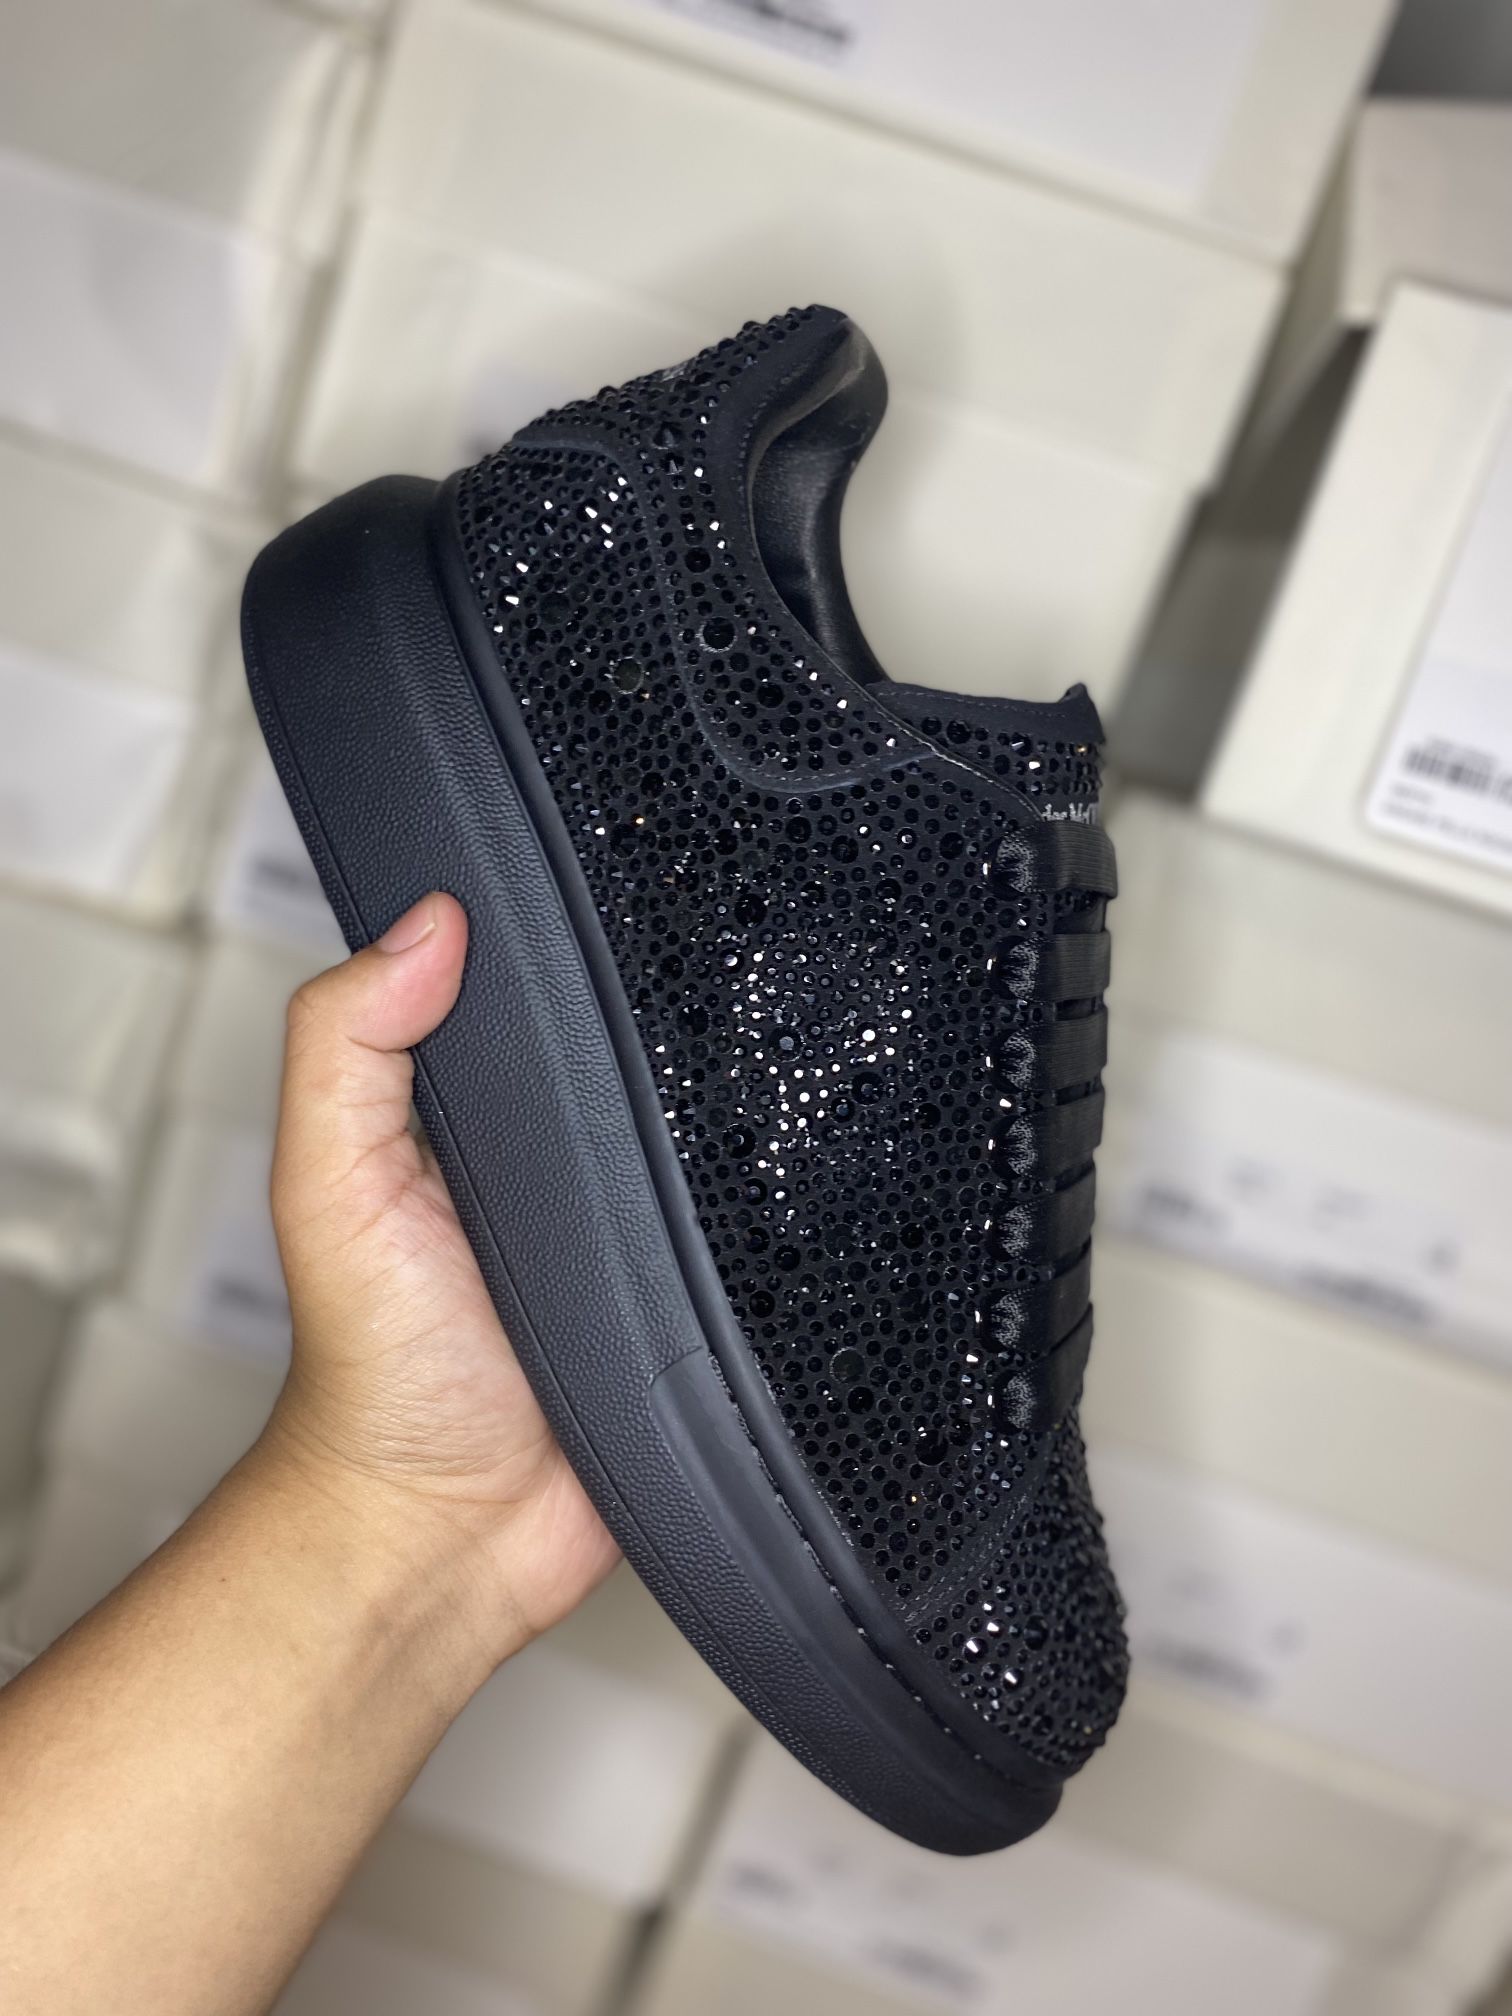 Black Leather Rhine Stone Low Tops for Sale in Santa Ana, CA - OfferUp